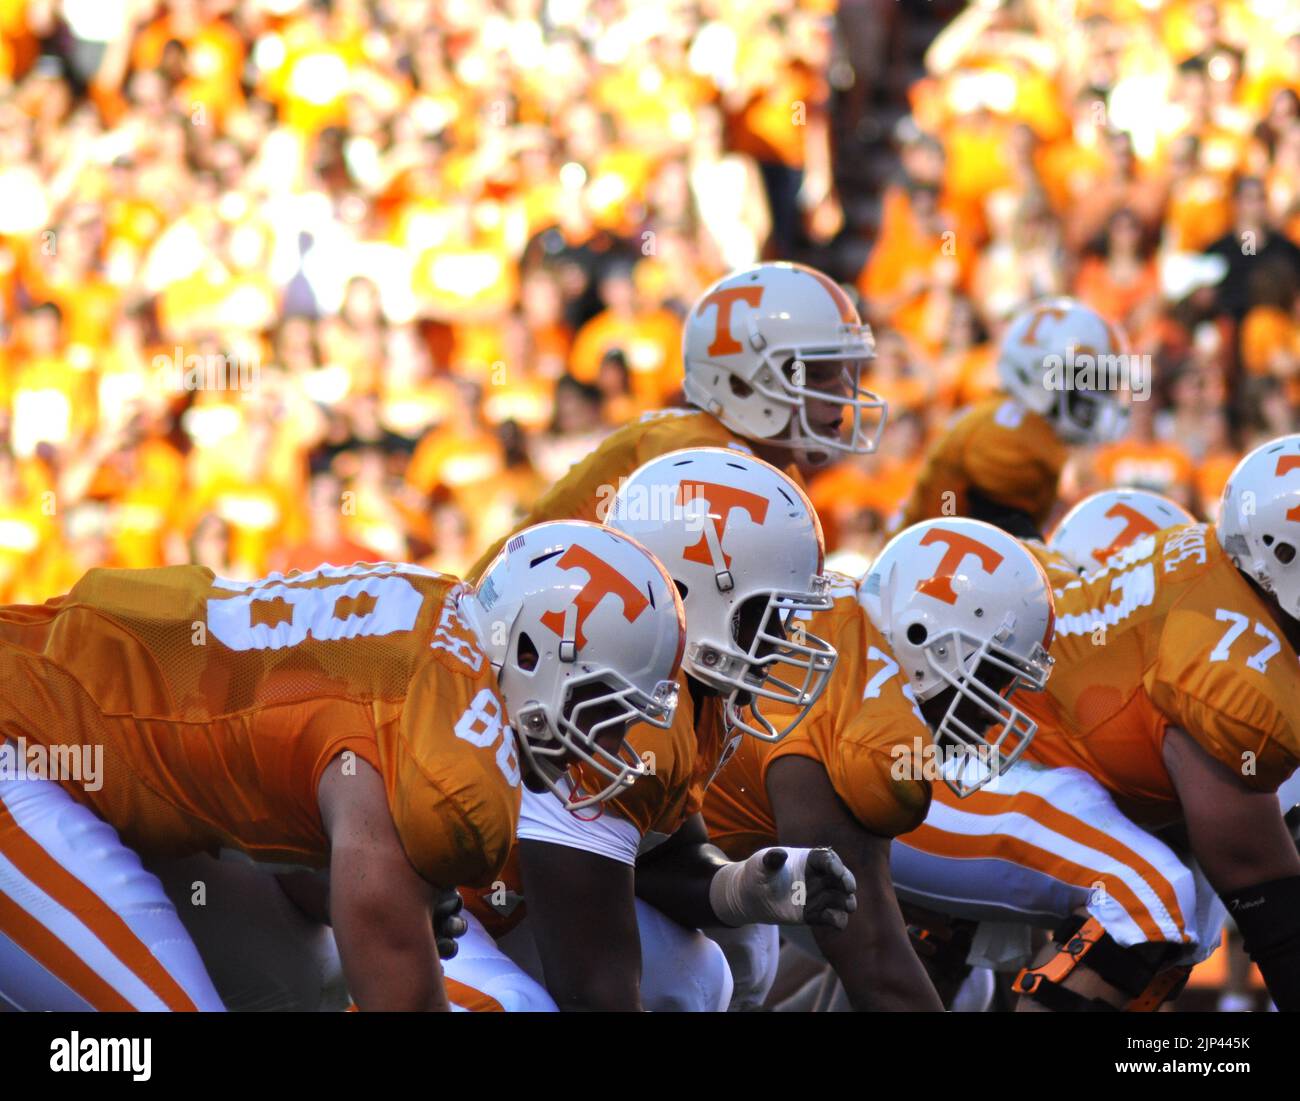 The University of Tennessee offense gathers at the line of scrimmage just moments before the snap of the ball. Stock Photo